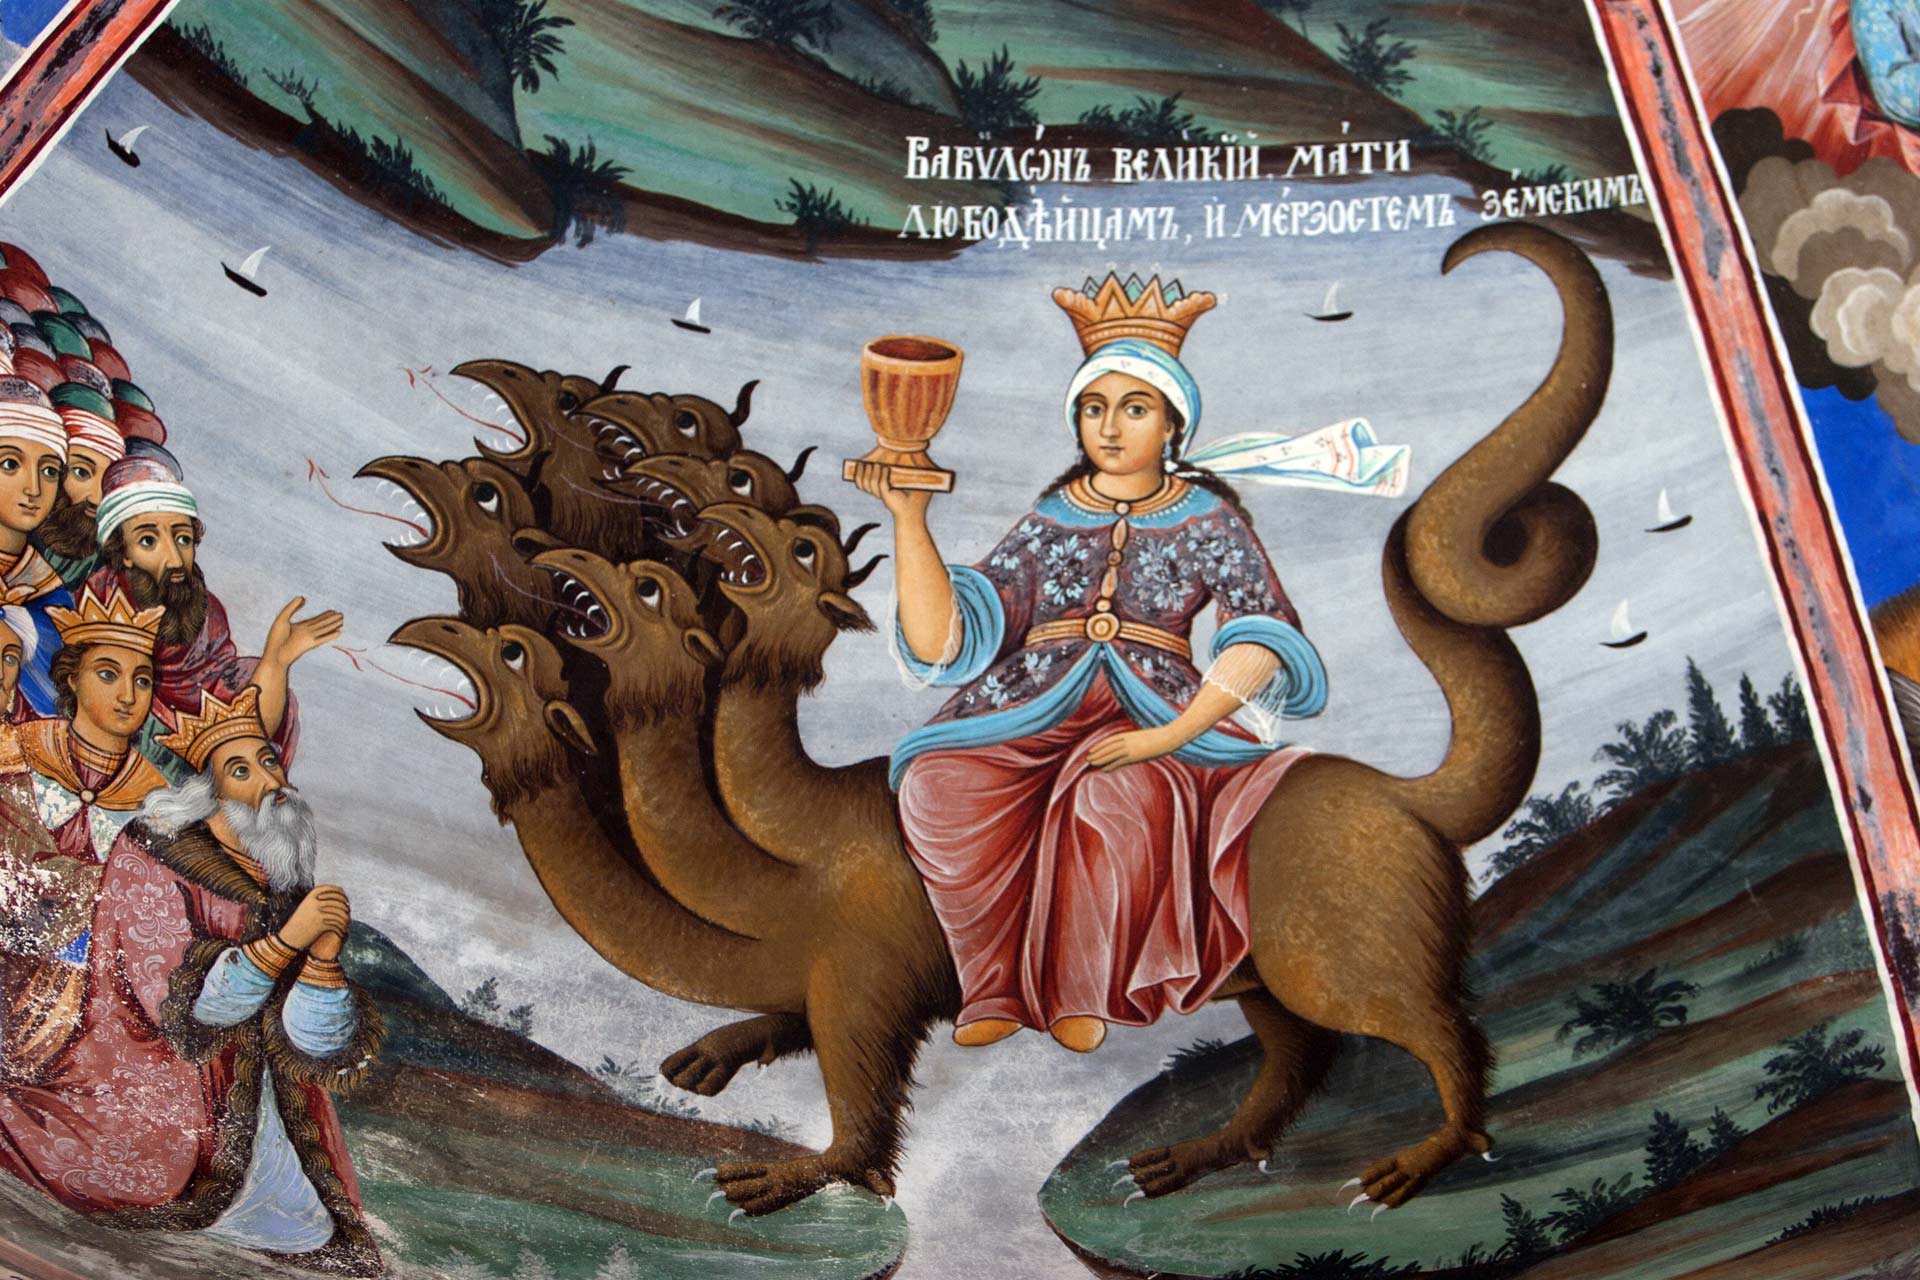 Paintings by Zahari Zograf on the outer walls of the Rila Monastery, Blagoevgrad, Bulgaria